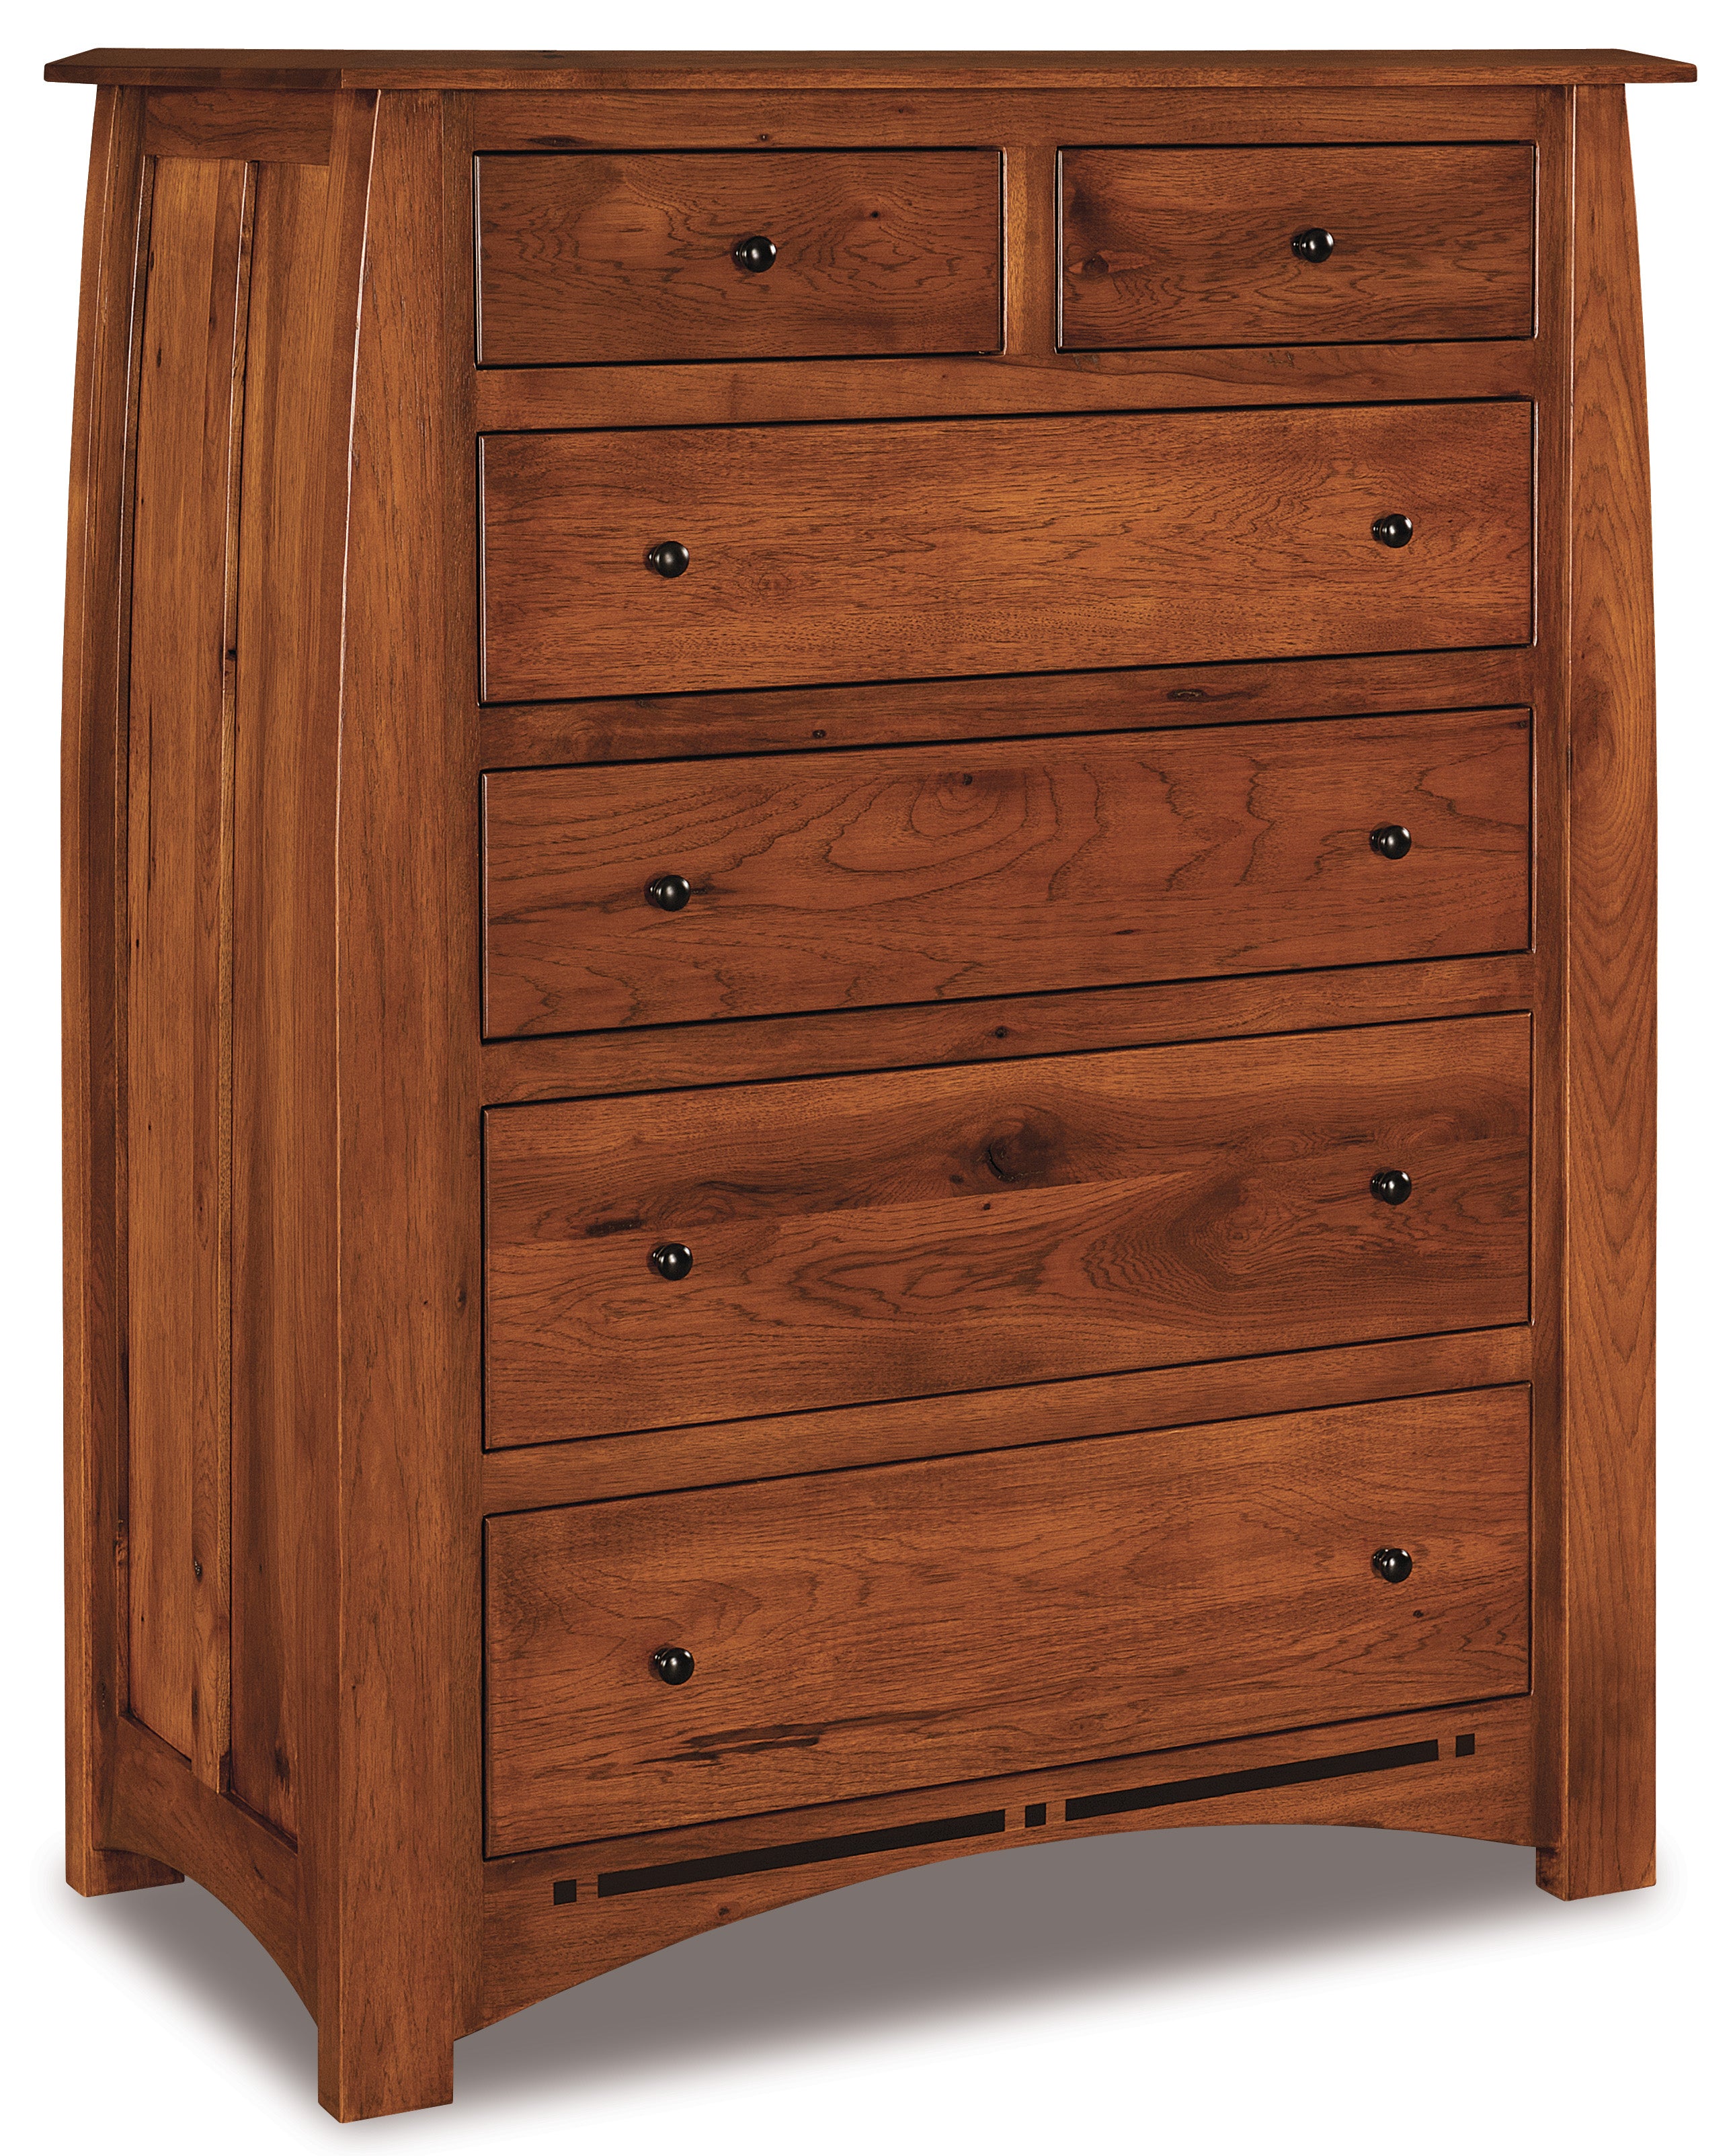 Boulder Creek Chest of Drawers - Quick Ship